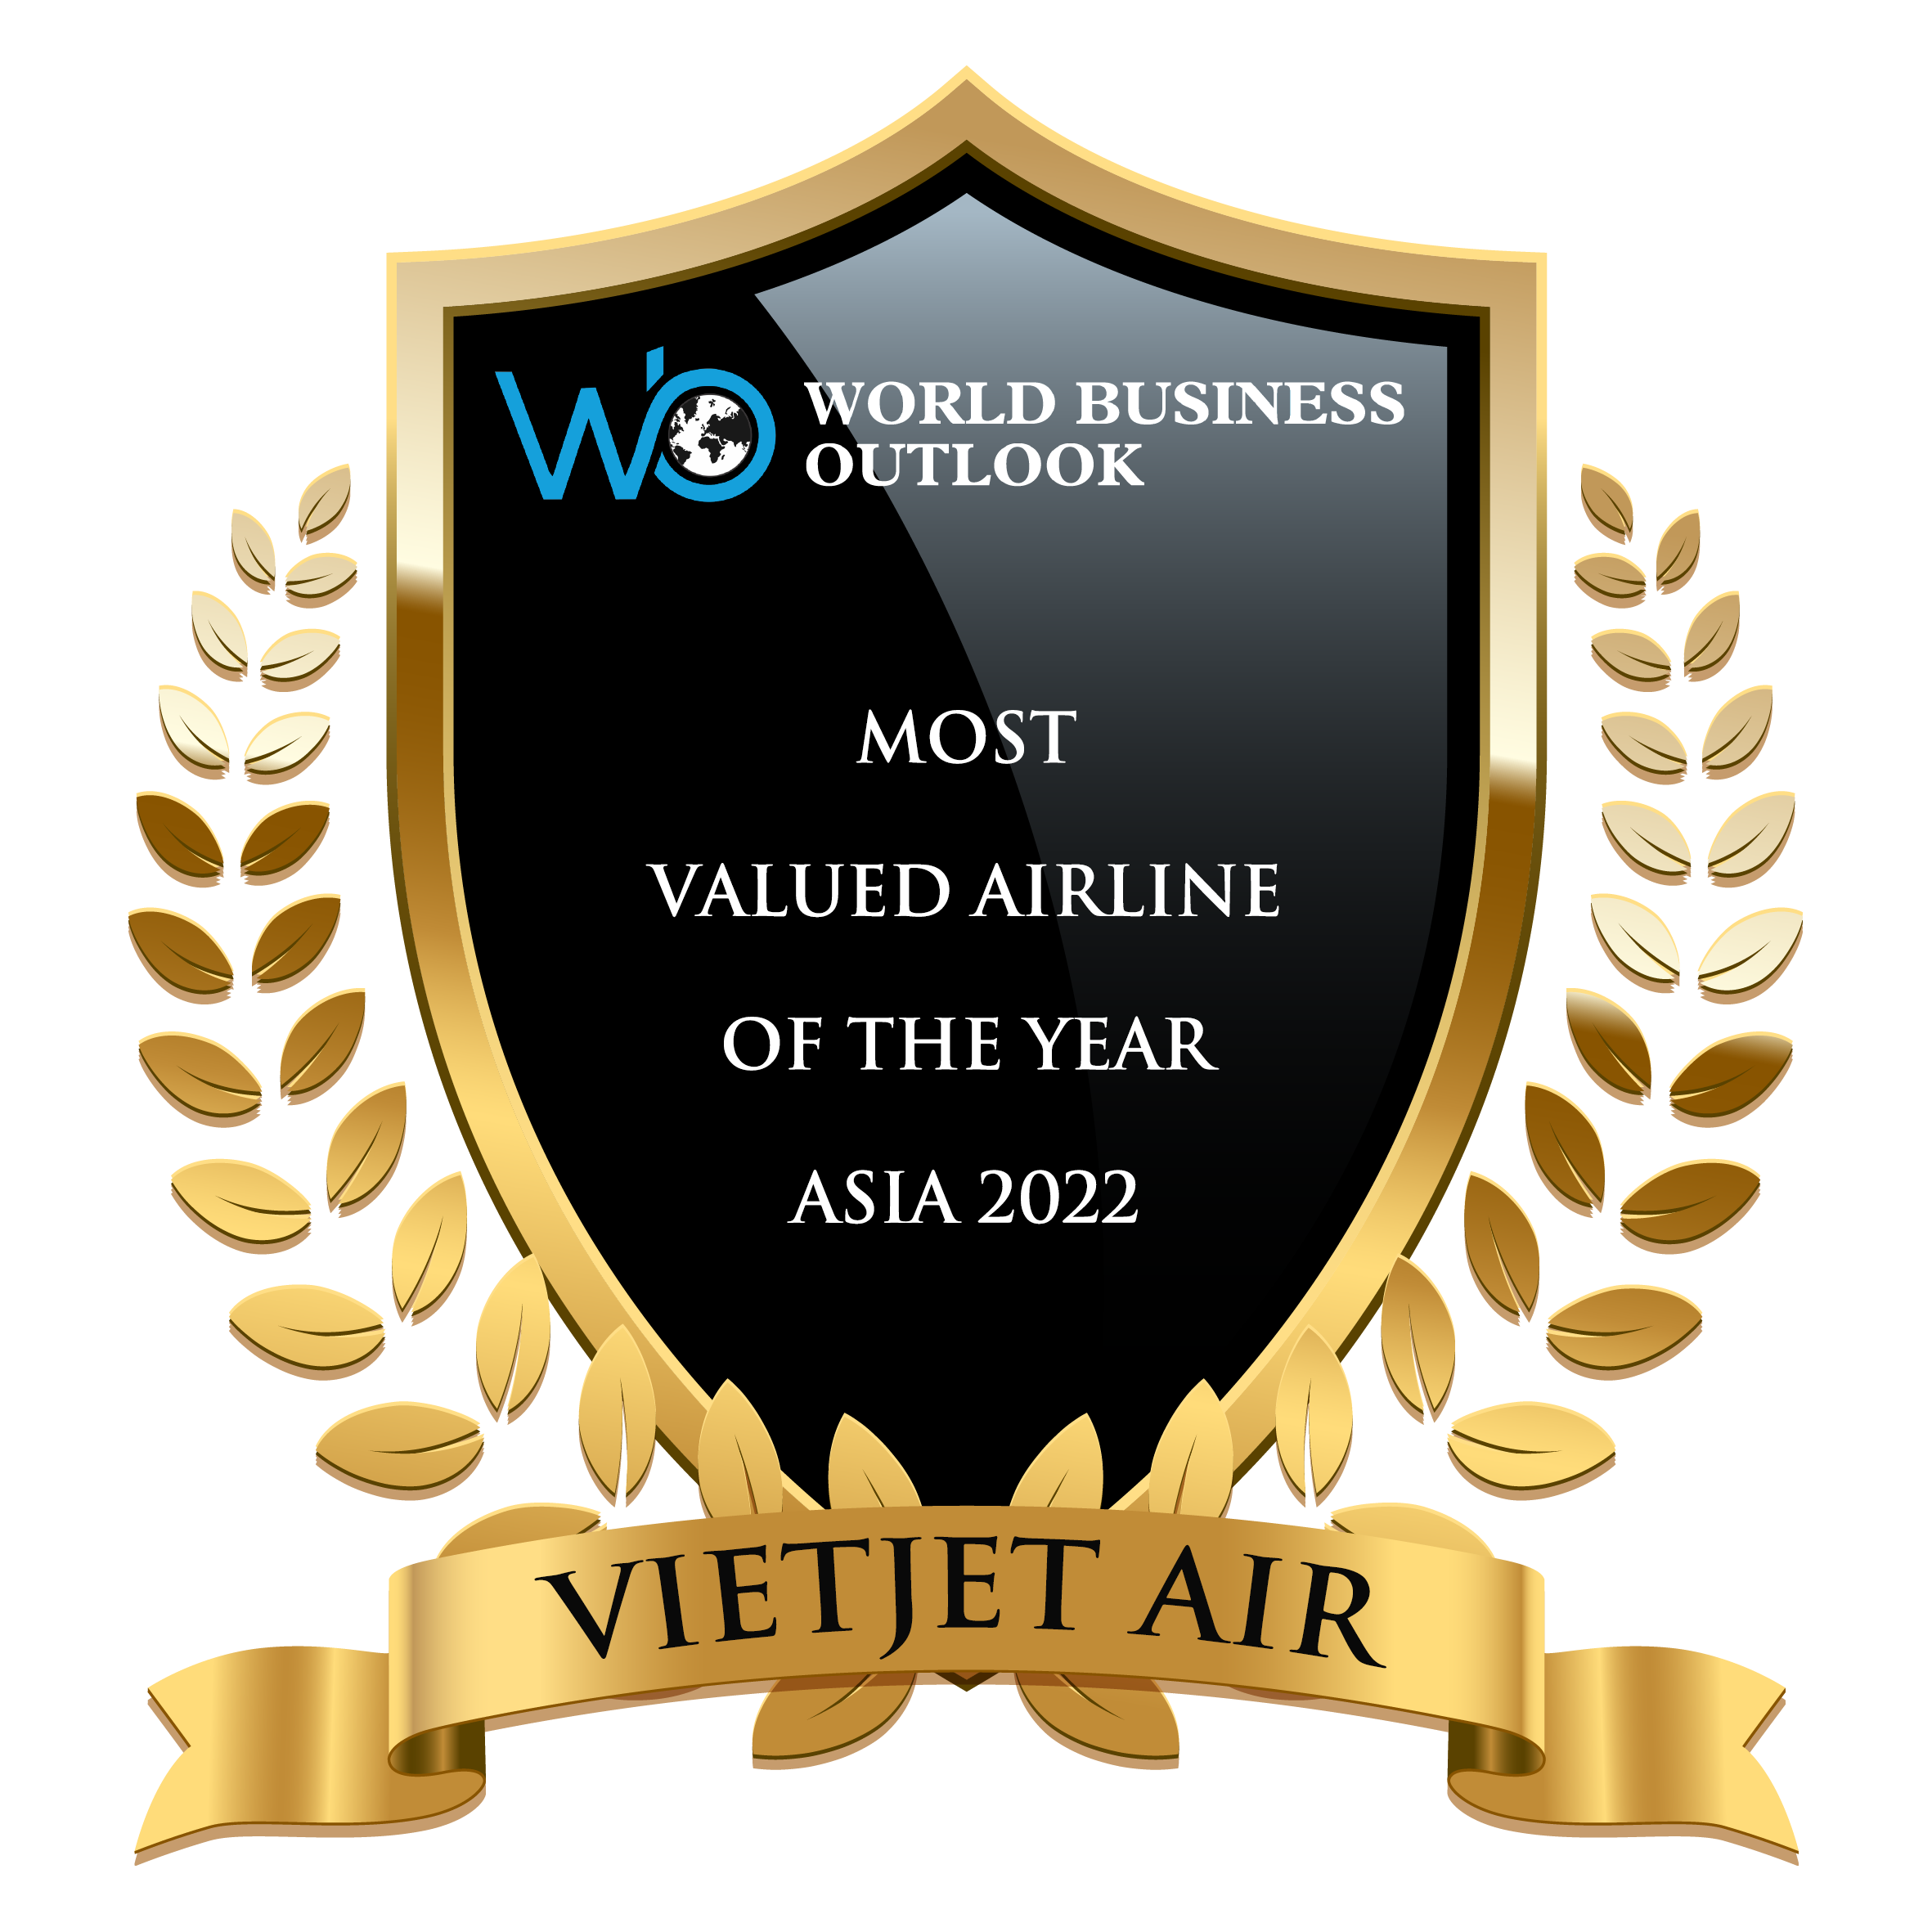 vietjet-air-most-valued-airline-asia-2022-1669628421.png